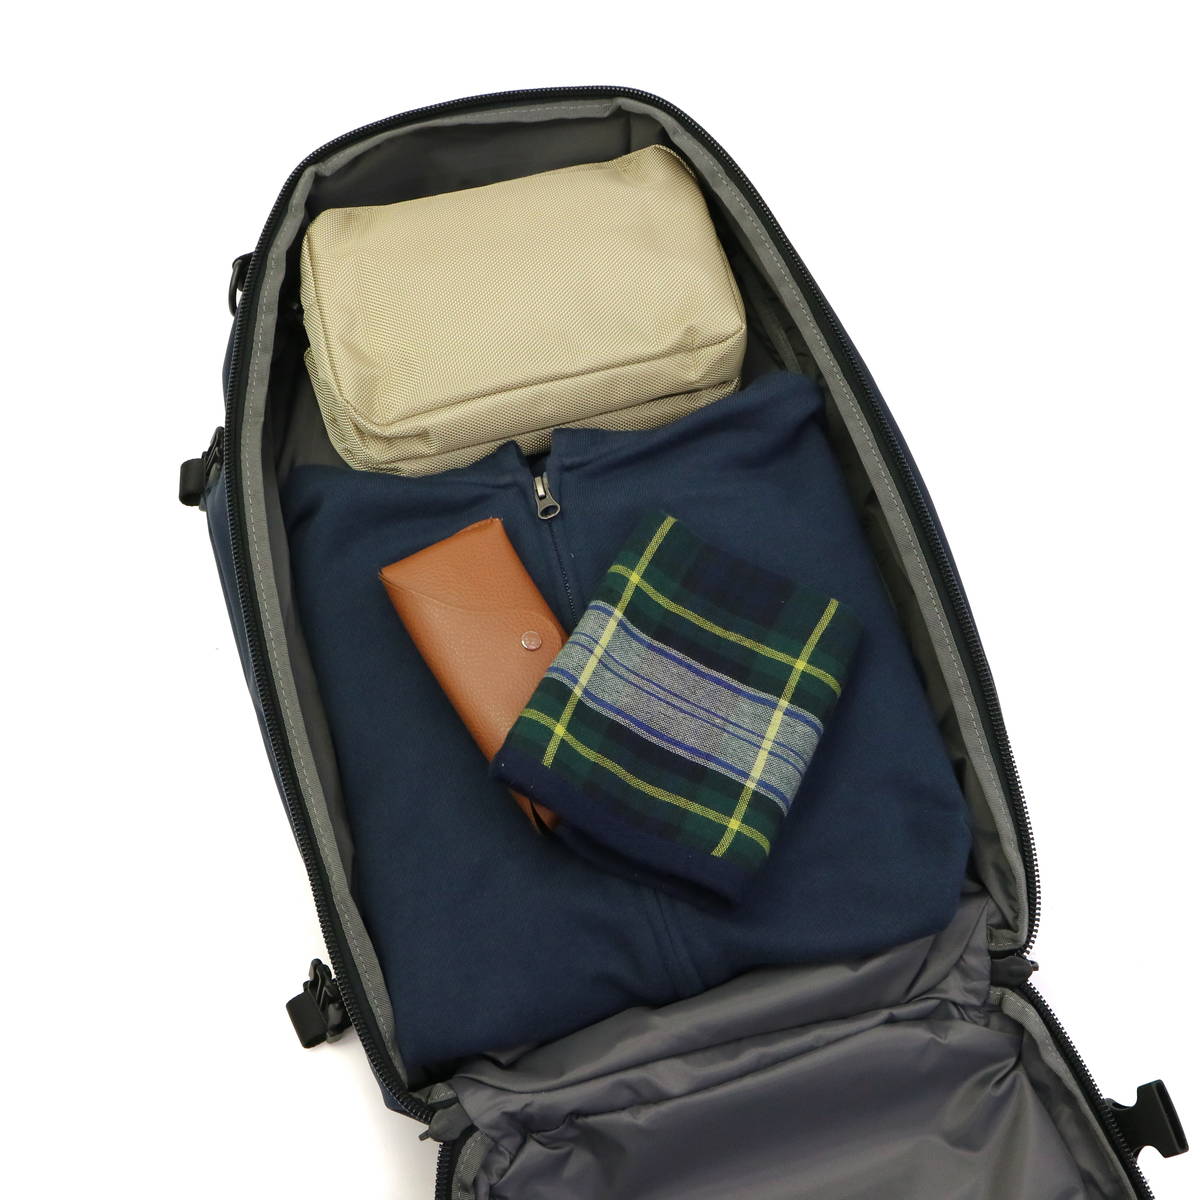 Aer エアー Travel Collection Travel Pack 2 バックパック 33L ...